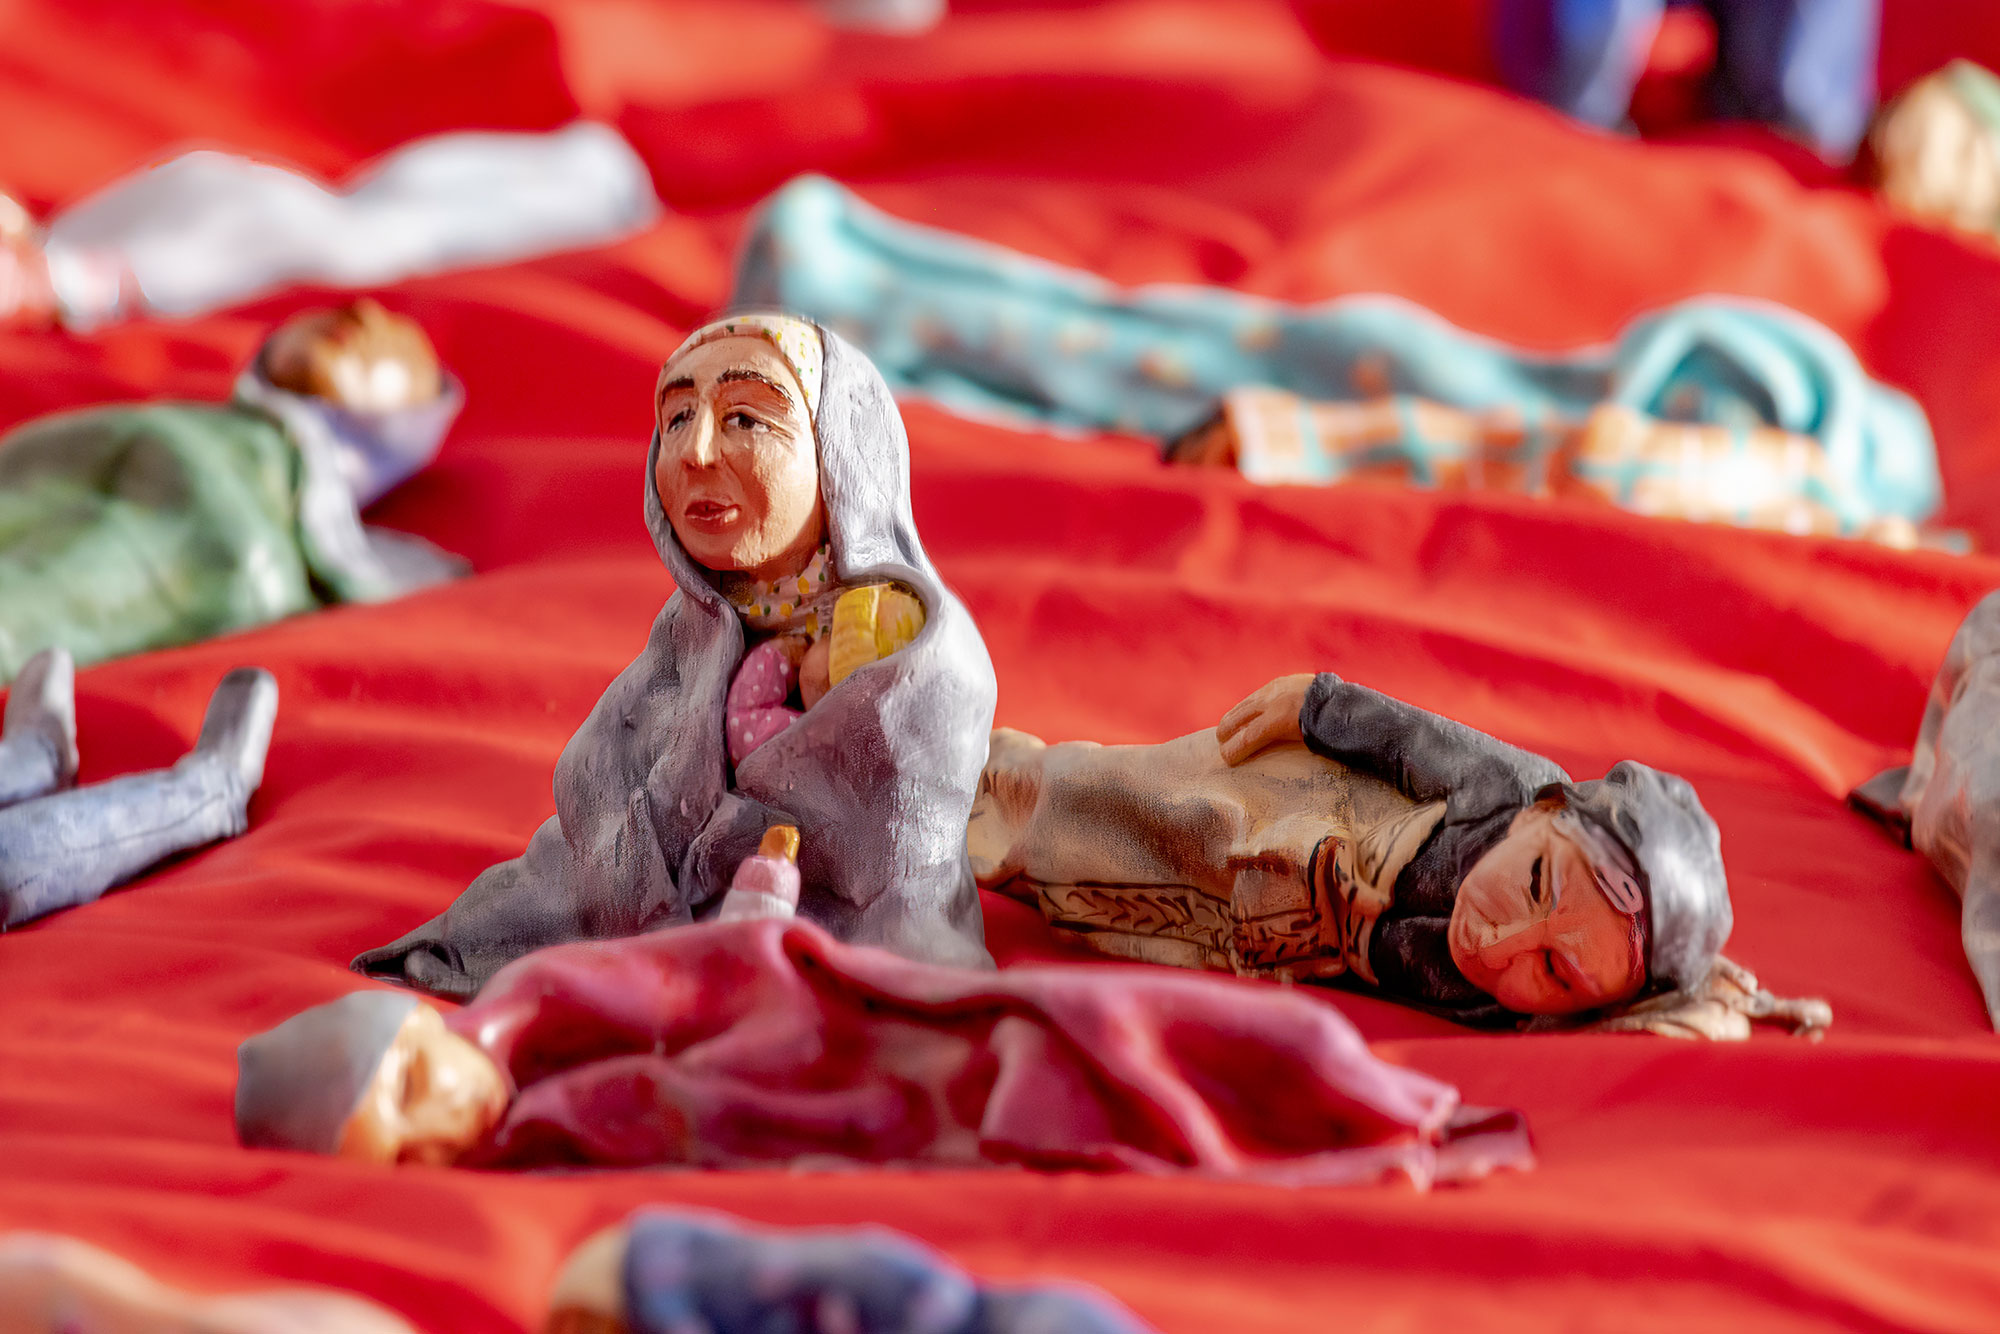 Miniature polymer clay figures depicting people experiencing homelessness lying on a red sleeping bag